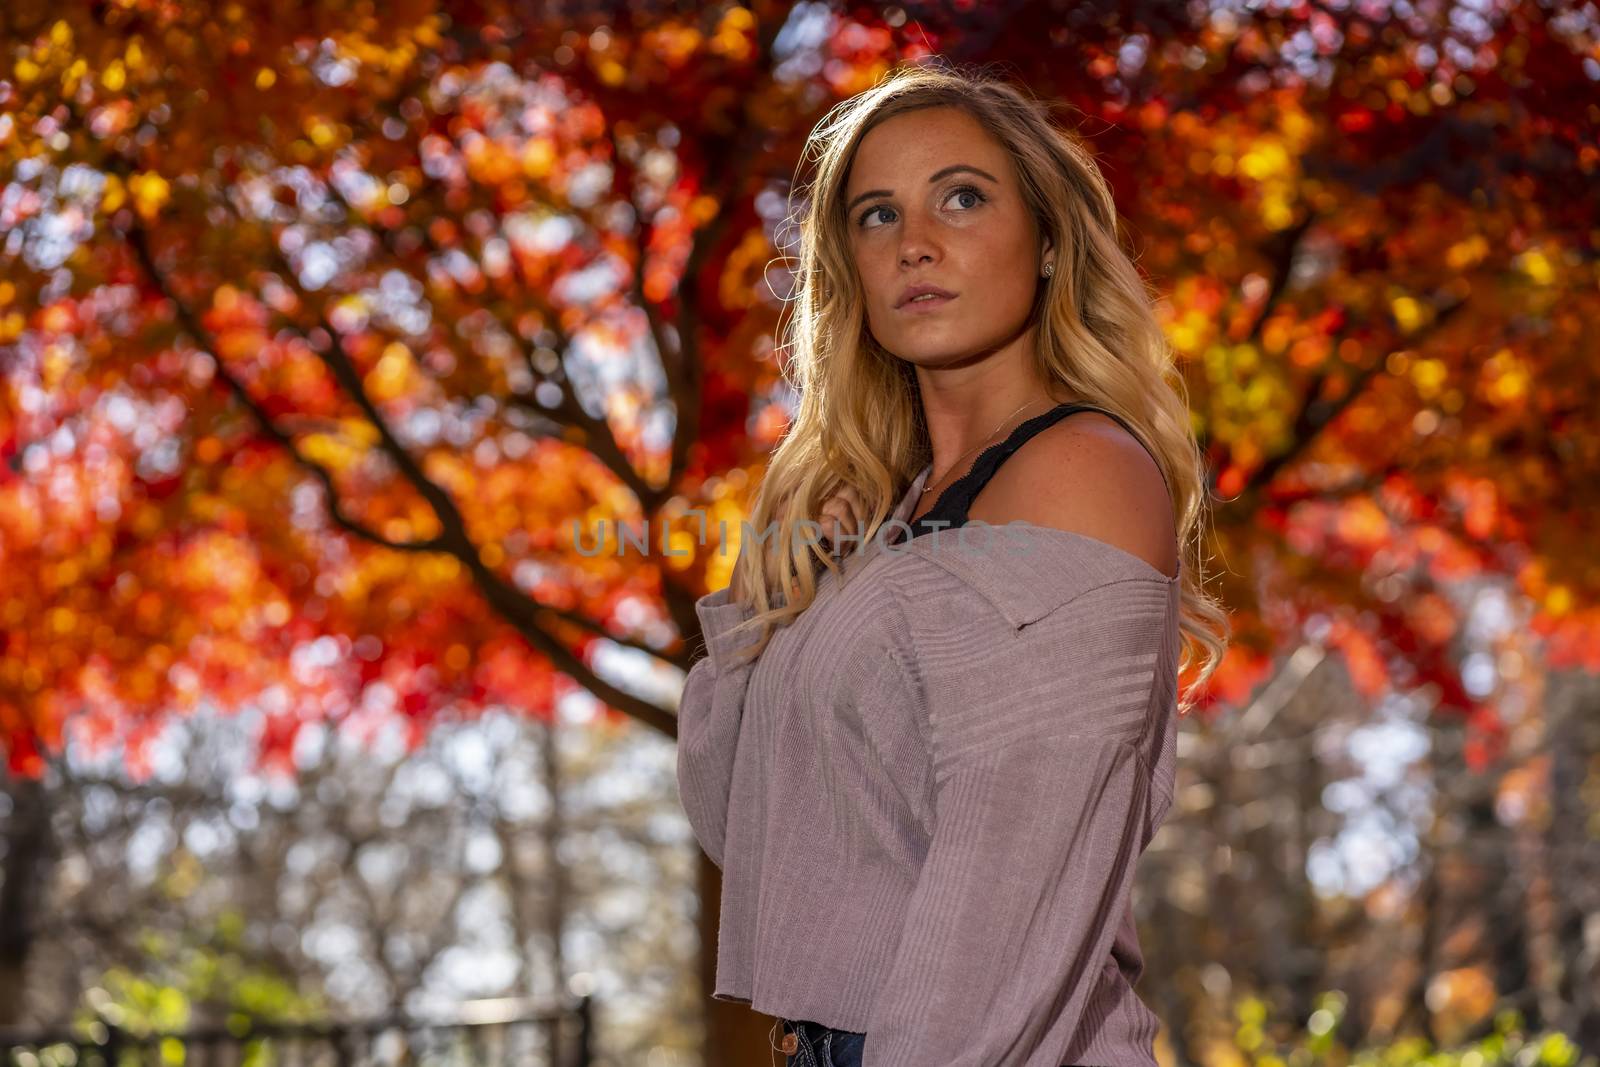 A Lovely Blonde Model Enjoys An Autumn Day Outdoors At The Park by actionsports